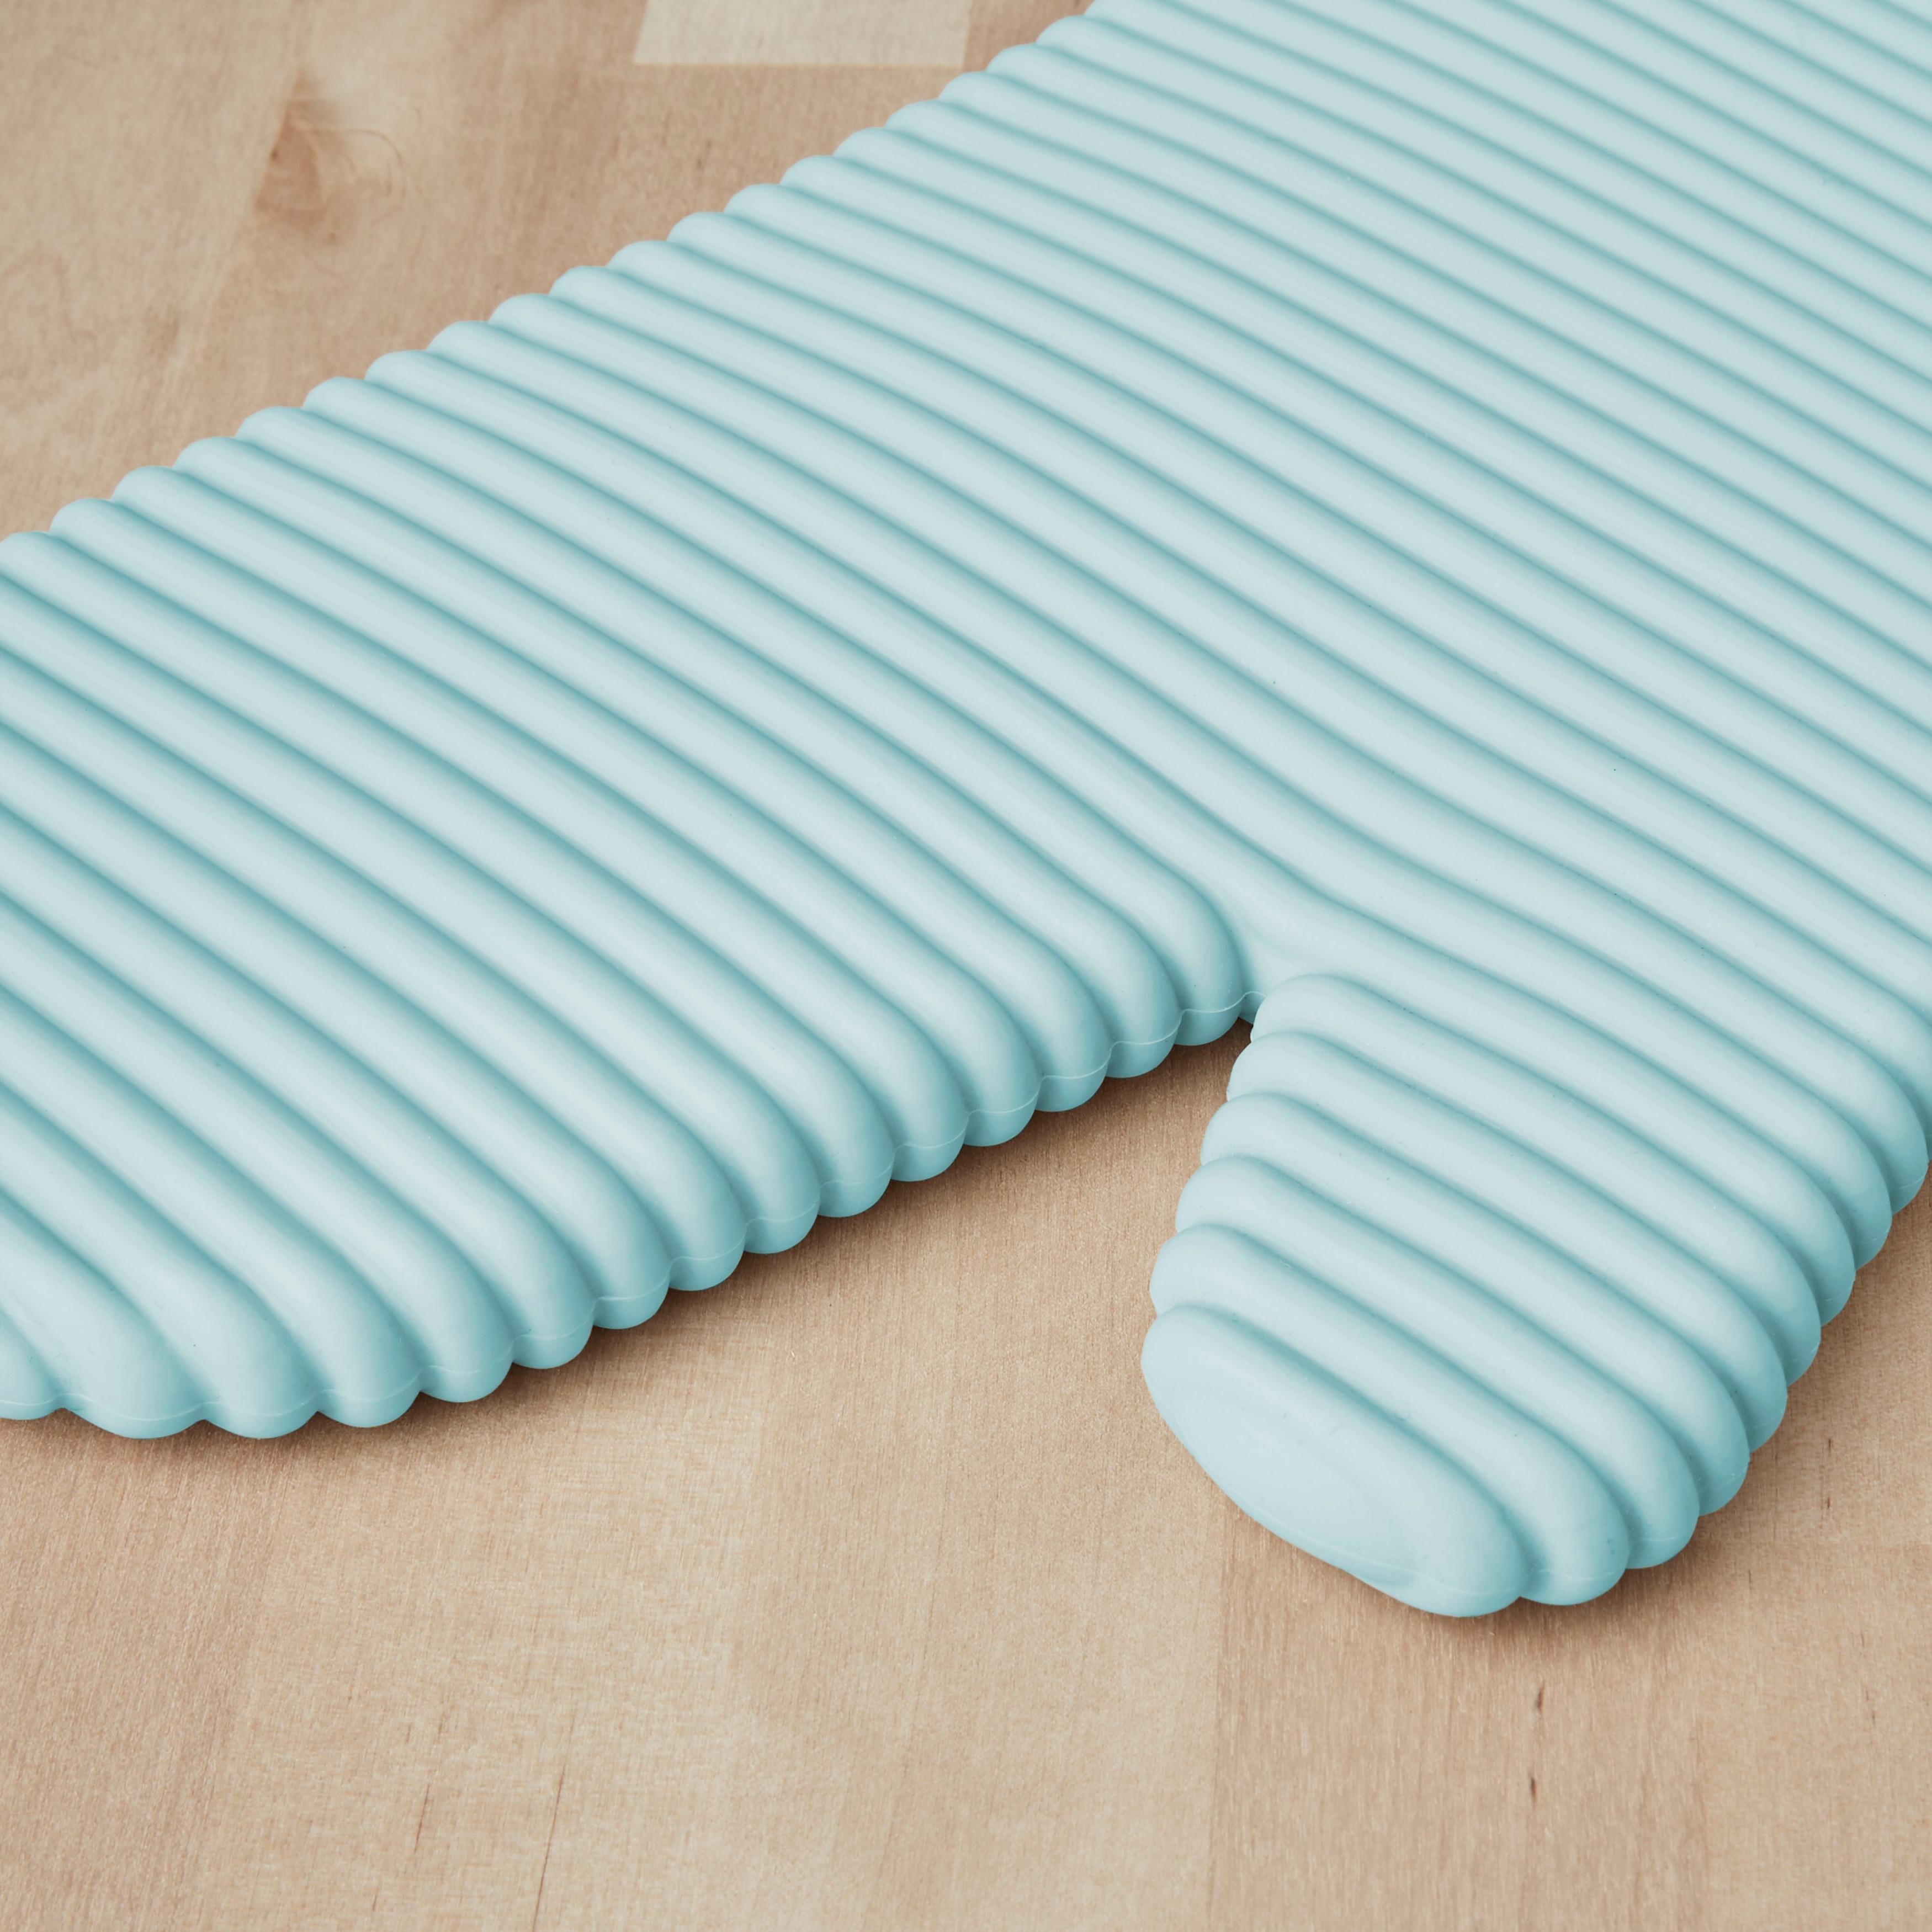 https://ak1.ostkcdn.com/images/products/is/images/direct/5624f83e98250fd6036c3924a60d837e0ee8fa30/KitchenAid-Ribbed-Soft-Silicone-Oven-Mitt-2-Pack-Set%2C-7.5%22x13%22.jpg